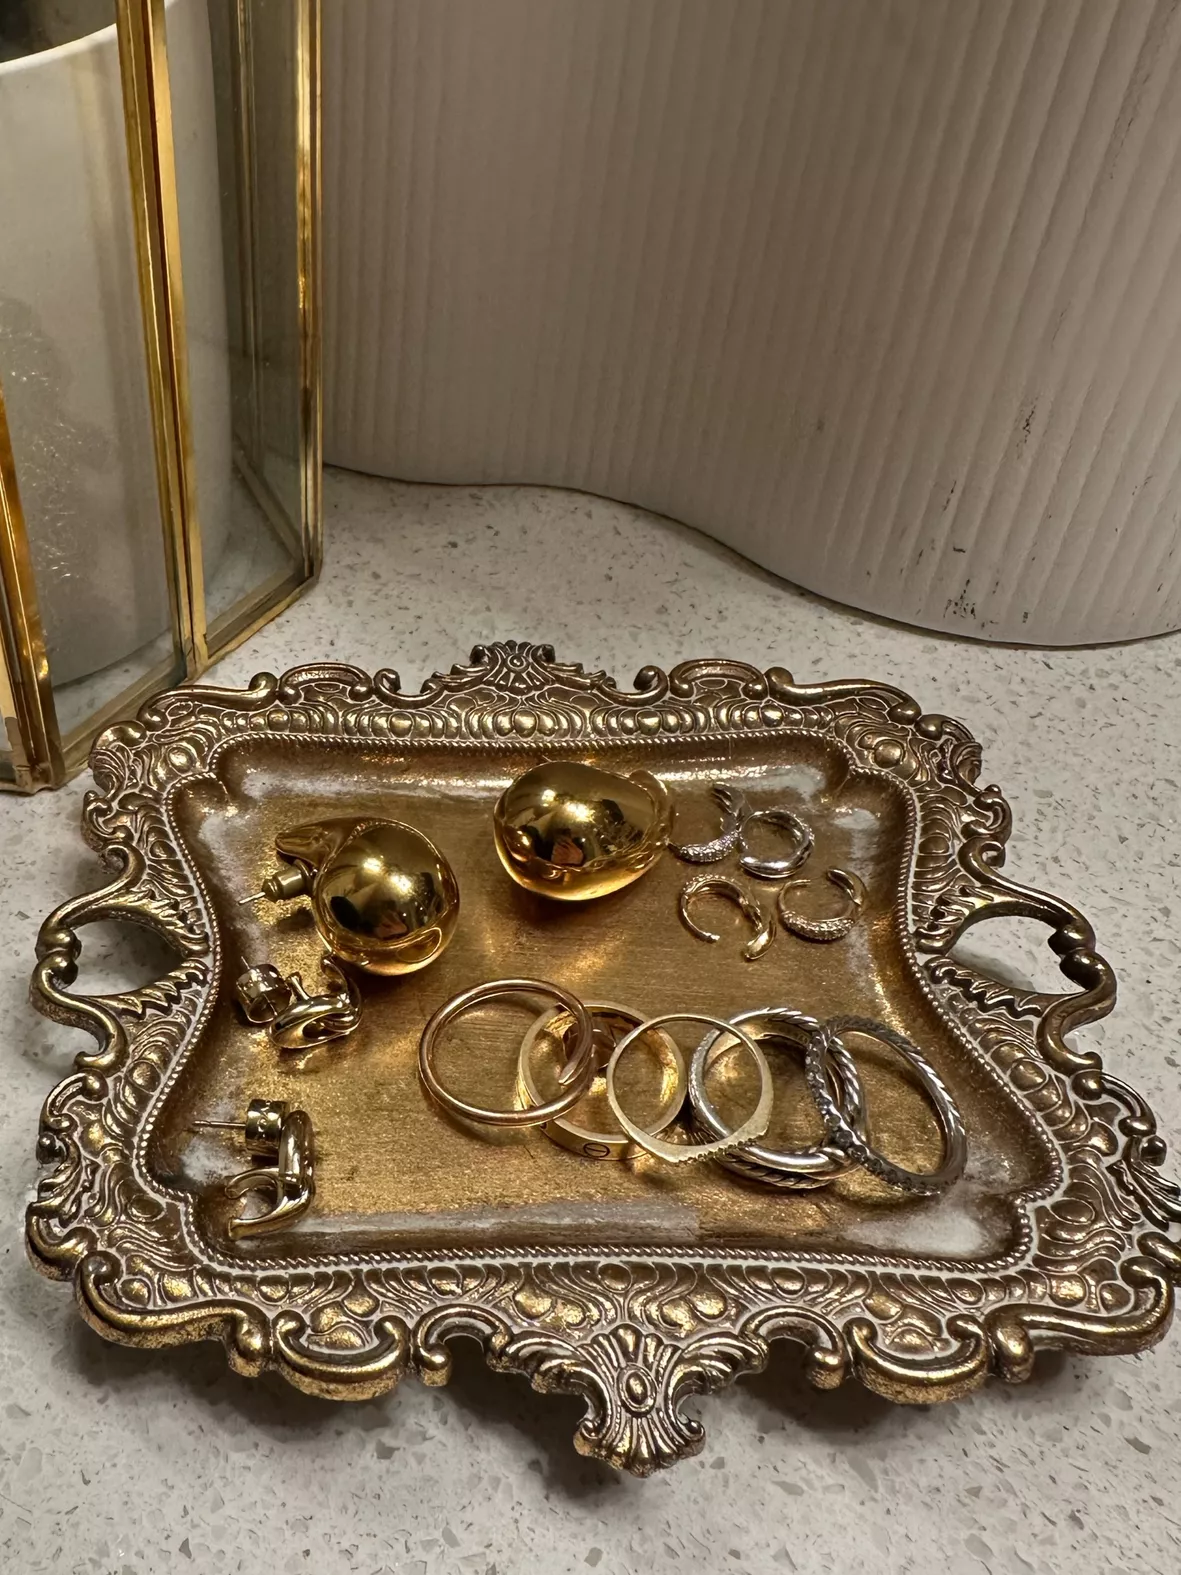  Funly mee Small Antique Trinket Dish Vintage Gold